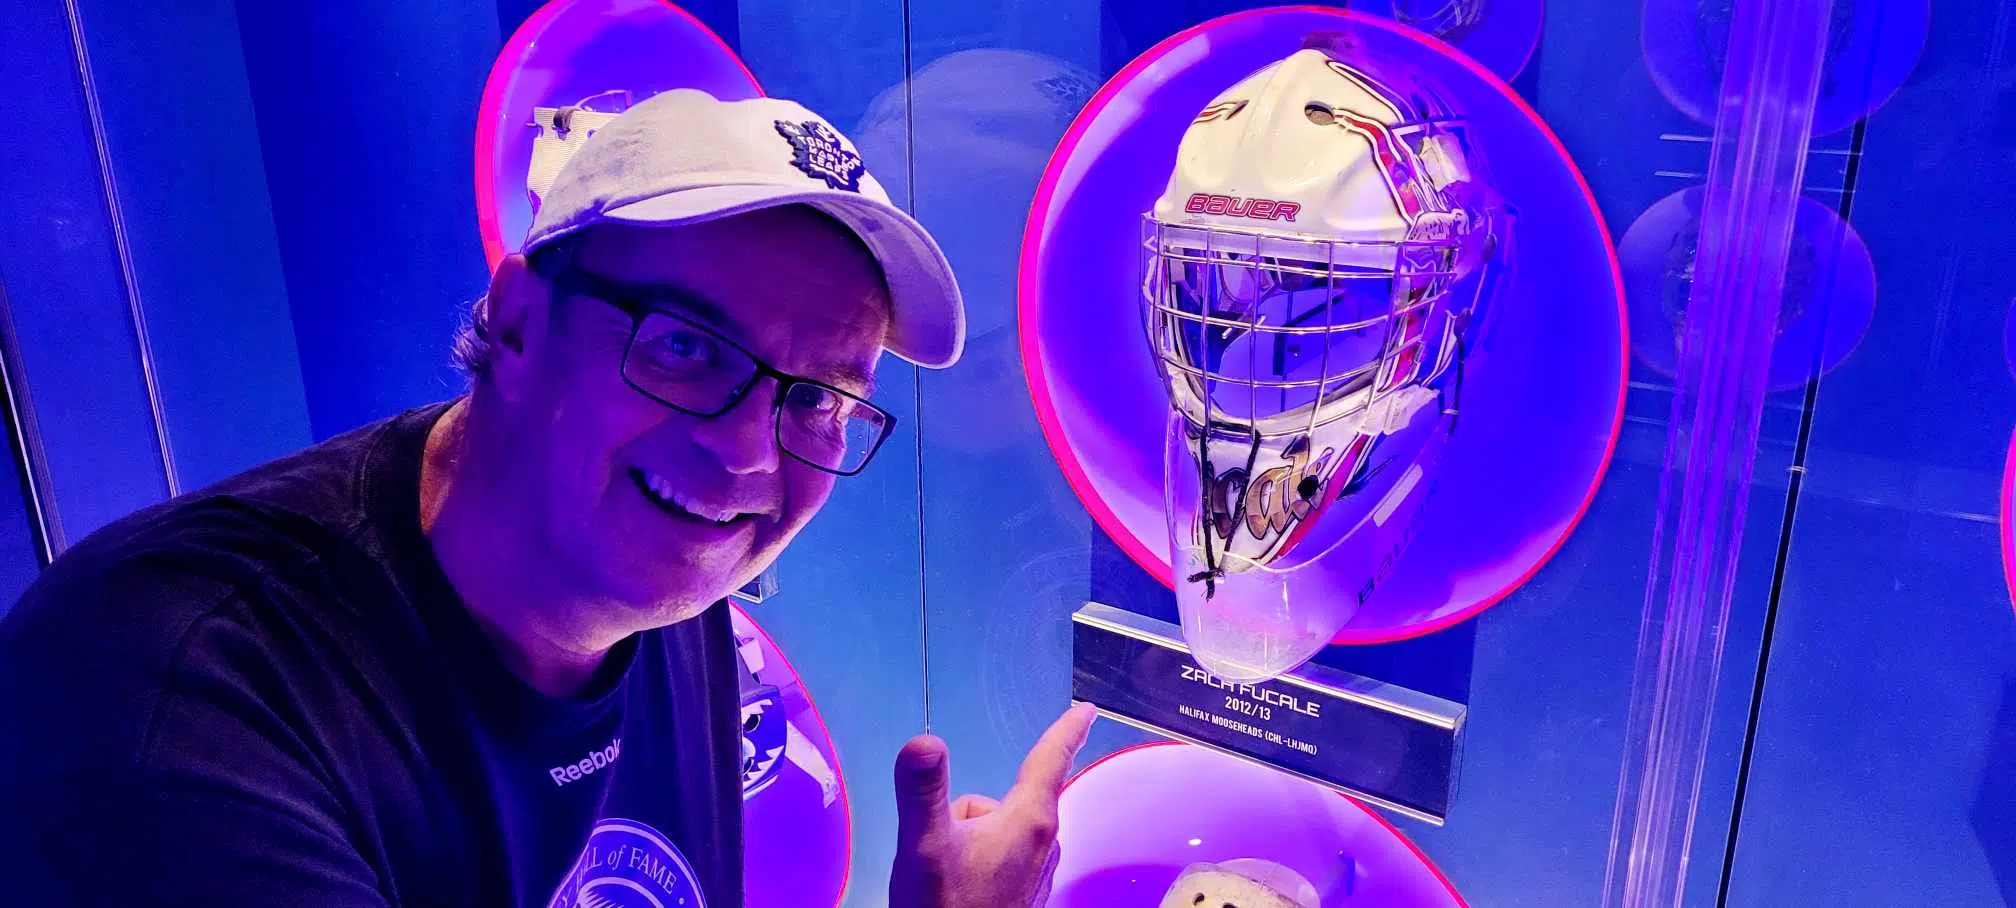 Ian's Visit To The Hockey Hall of Fame Has Halifax Connection